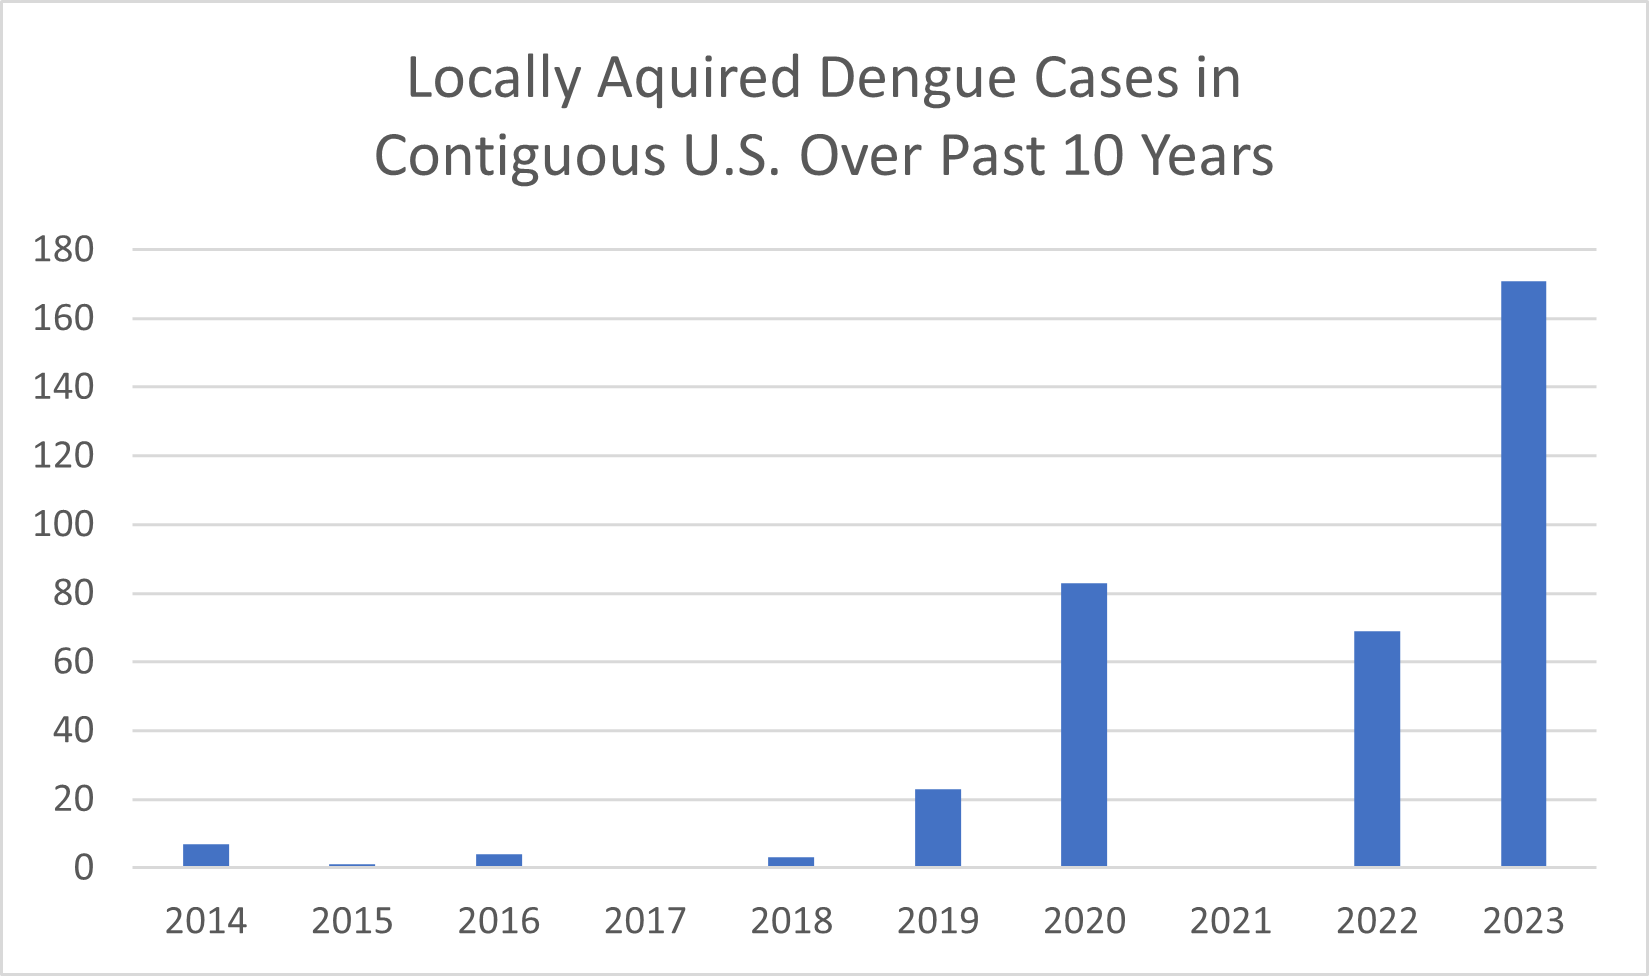 Number of locally acquired dengue cases in the contiguous U.S. over the past decade. Locally acquired cases occurred among people with no history of travel to a dengue-endemic region in the two weeks before illness onset.